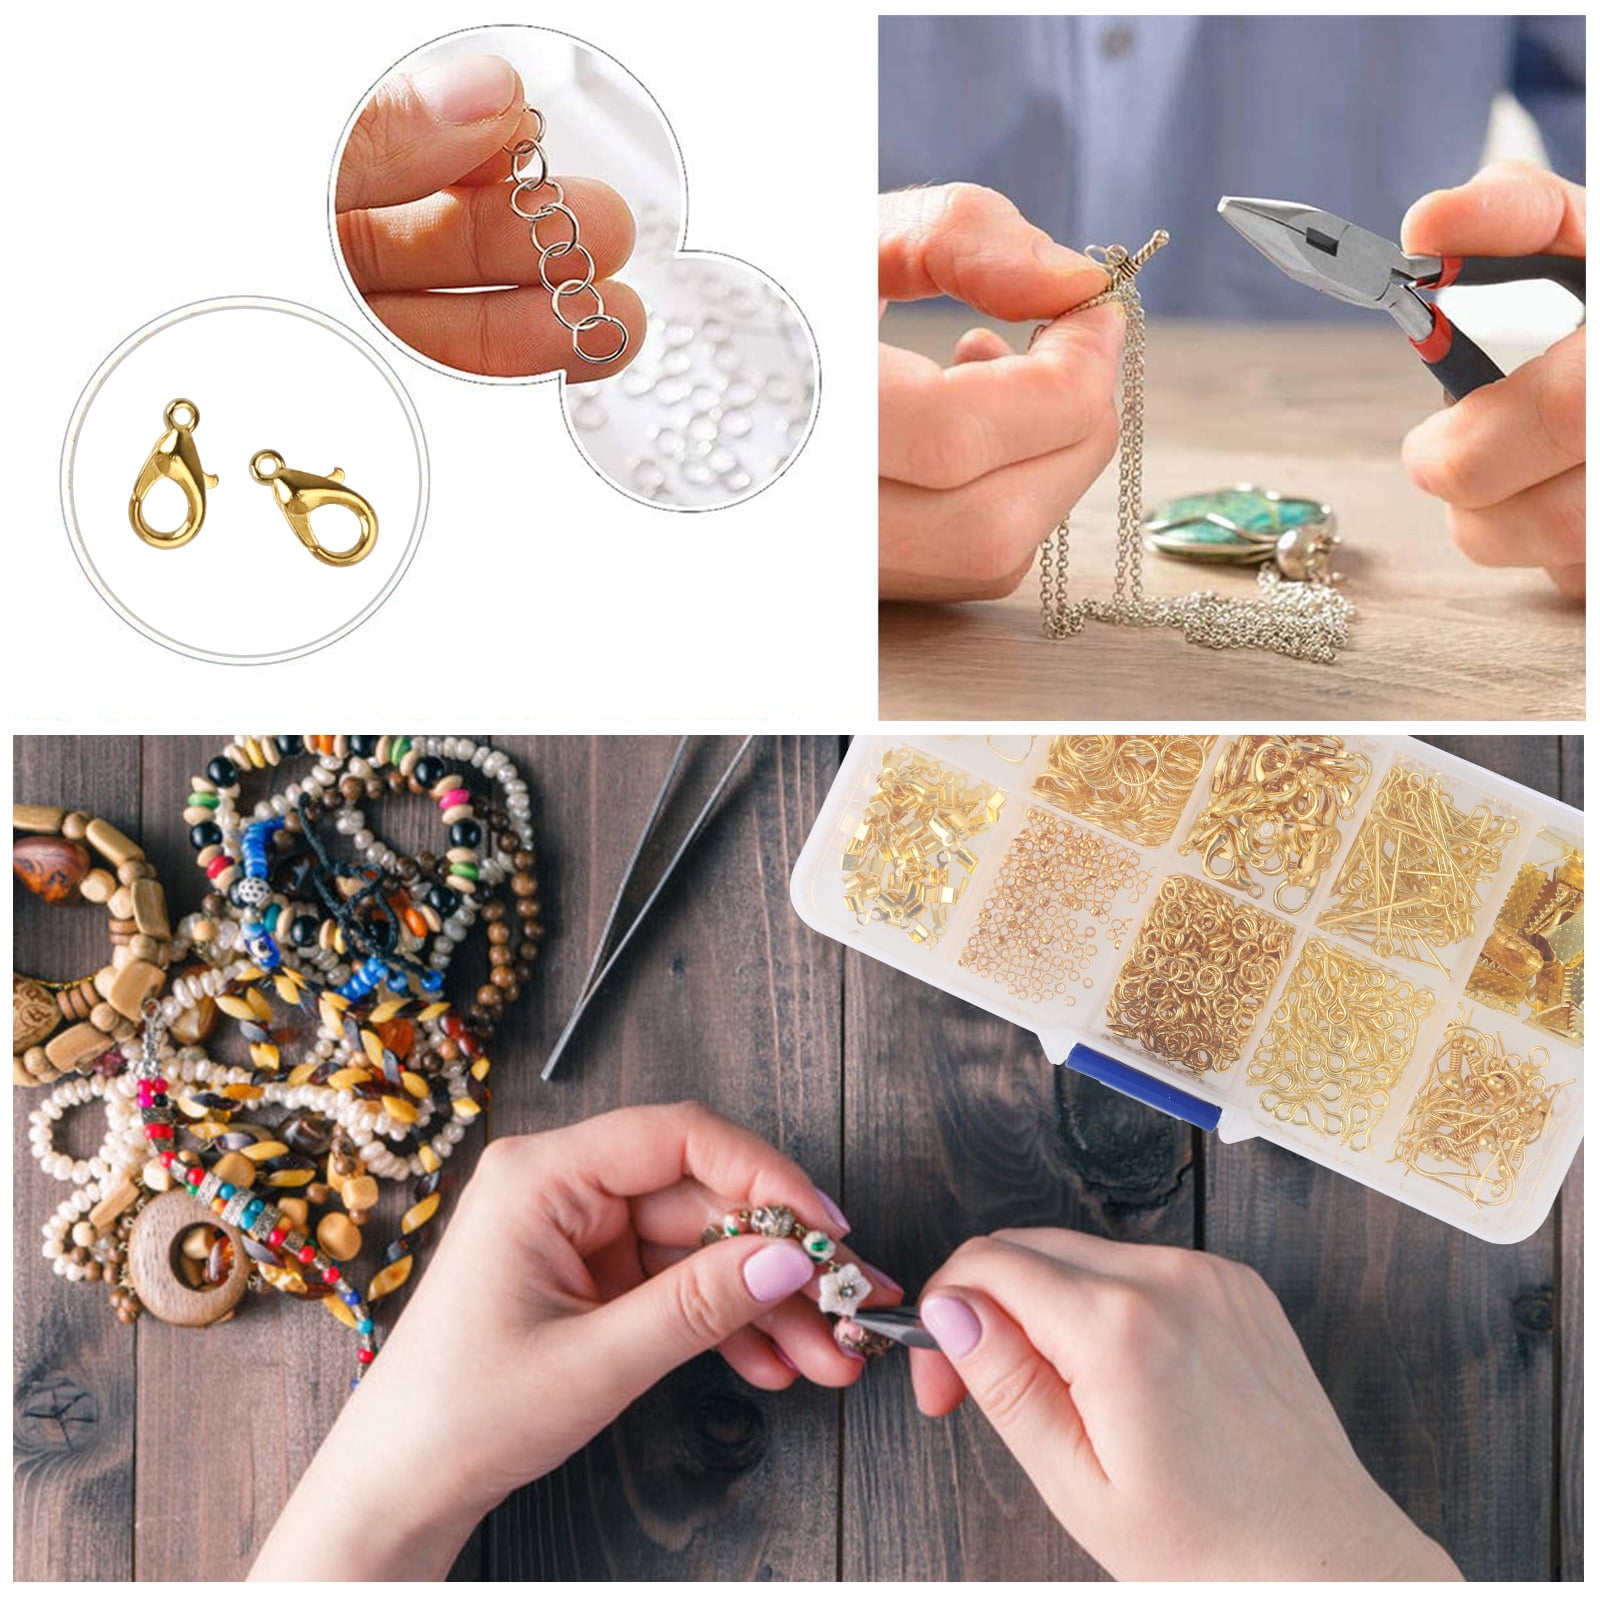 Jewelry Making Supplies Wire Wrapping Kit With Jewelry Beading Tools Wire  Helping Hands Findings And Pendants251x From Ai828, $28.21